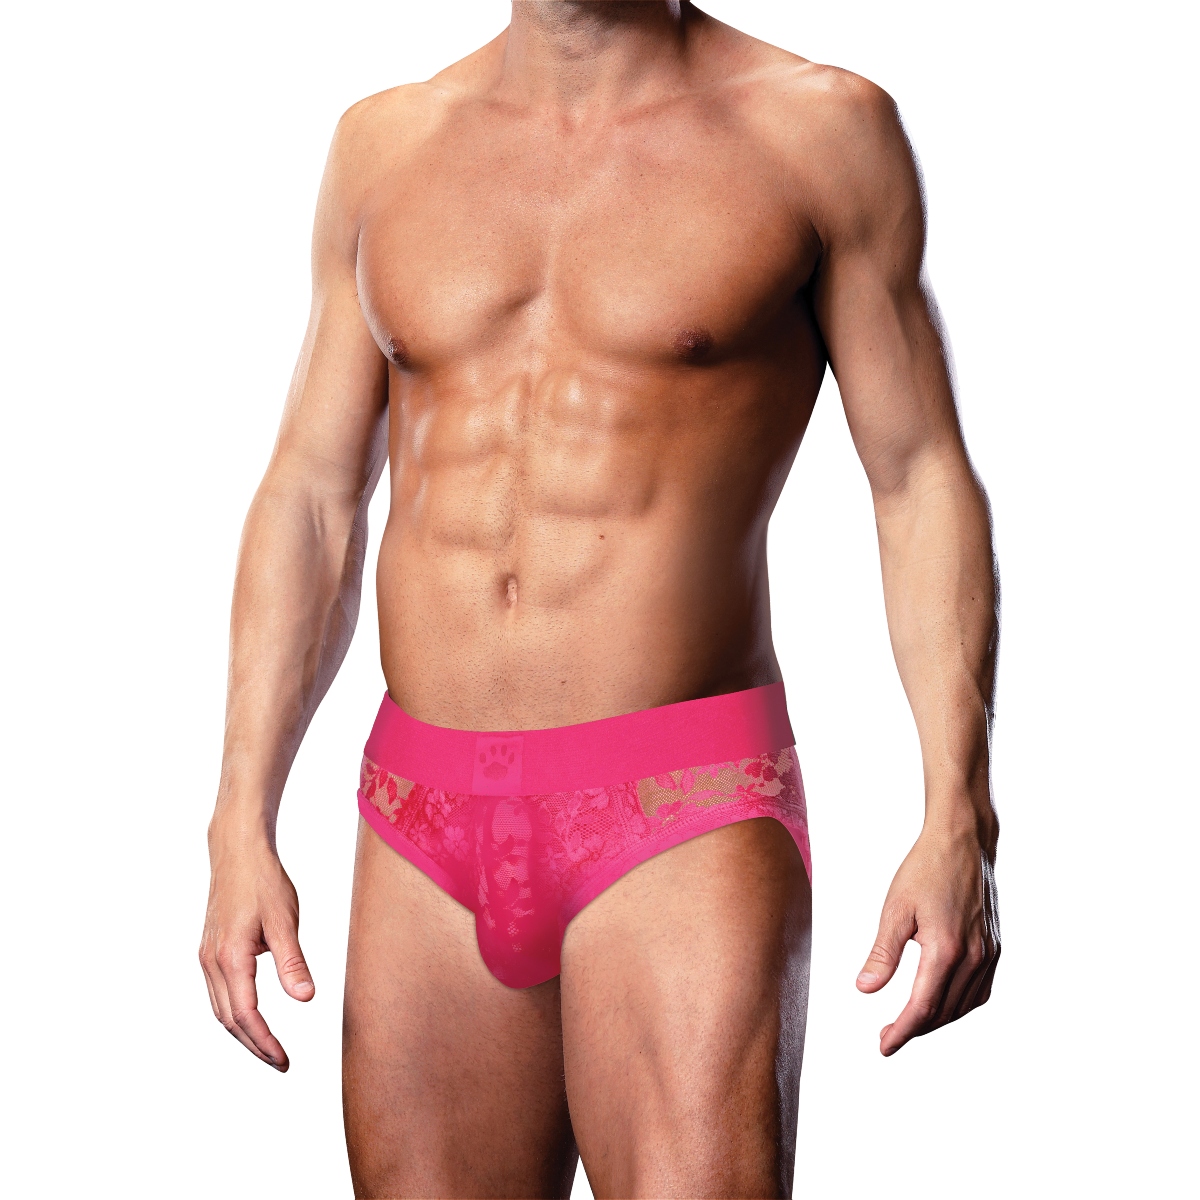 Prowler Pink Lace Open Back Brief Large